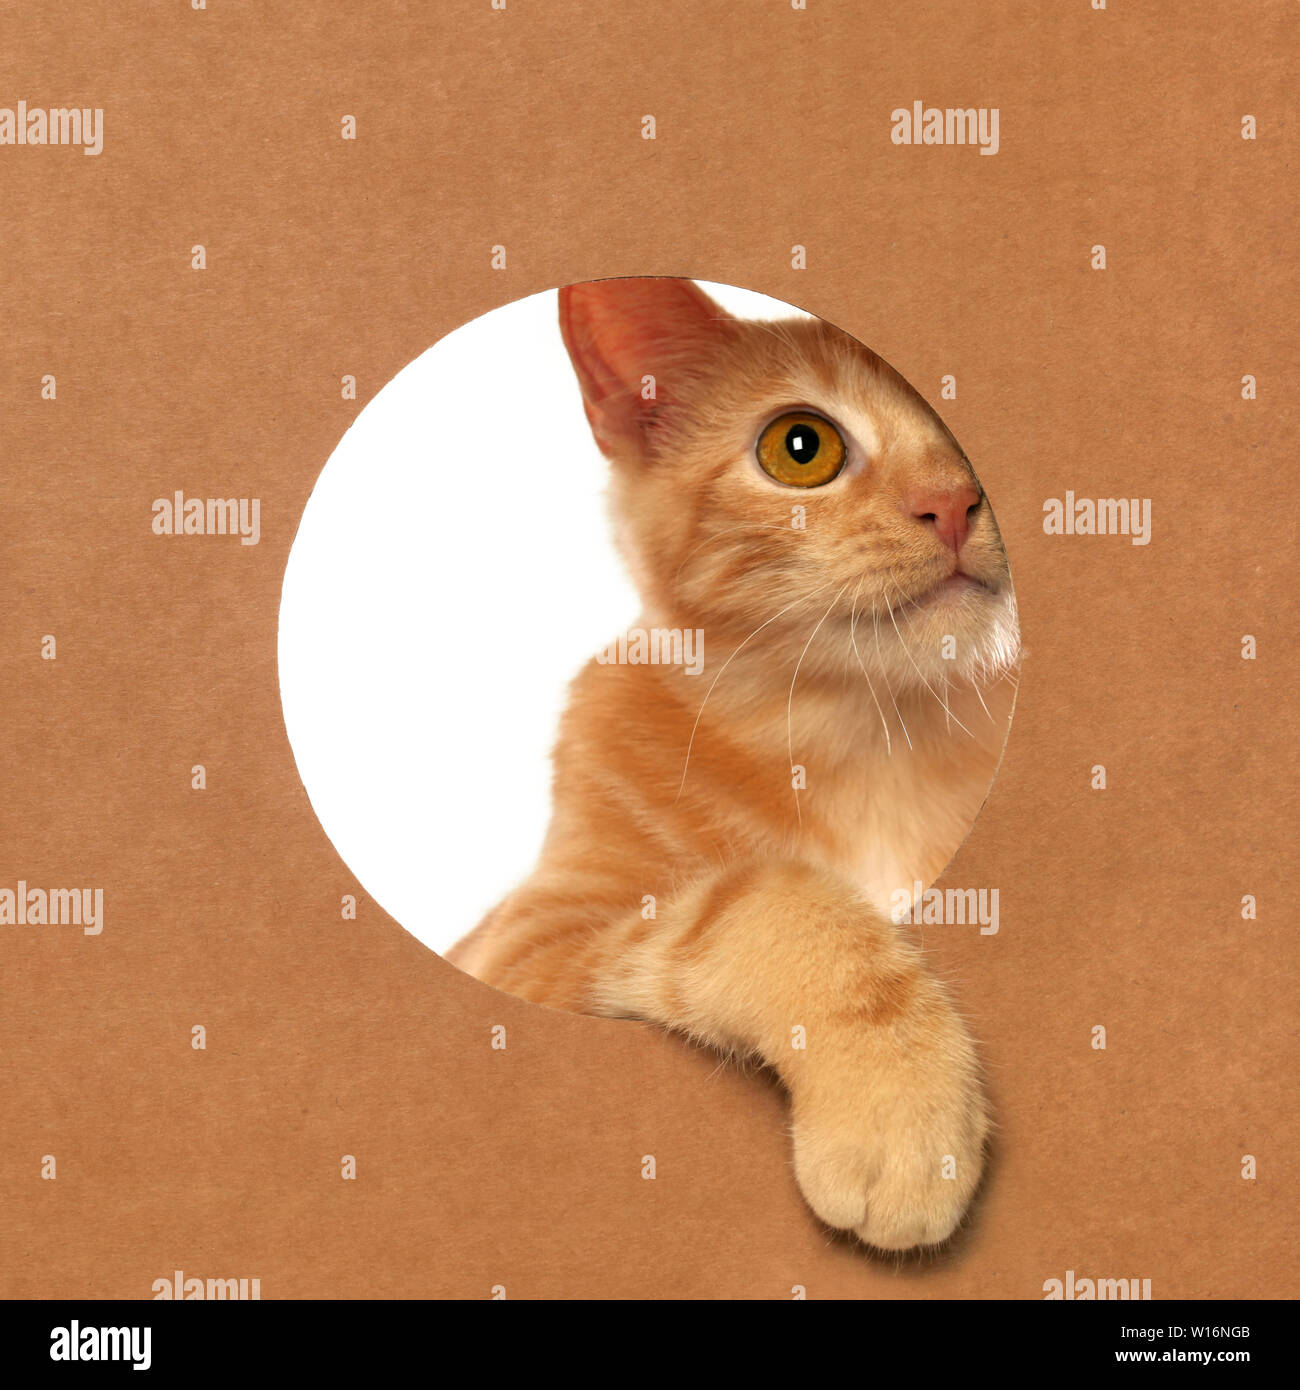 Cute little orange tabby kitten playing in a cardboard box Banque D'Images